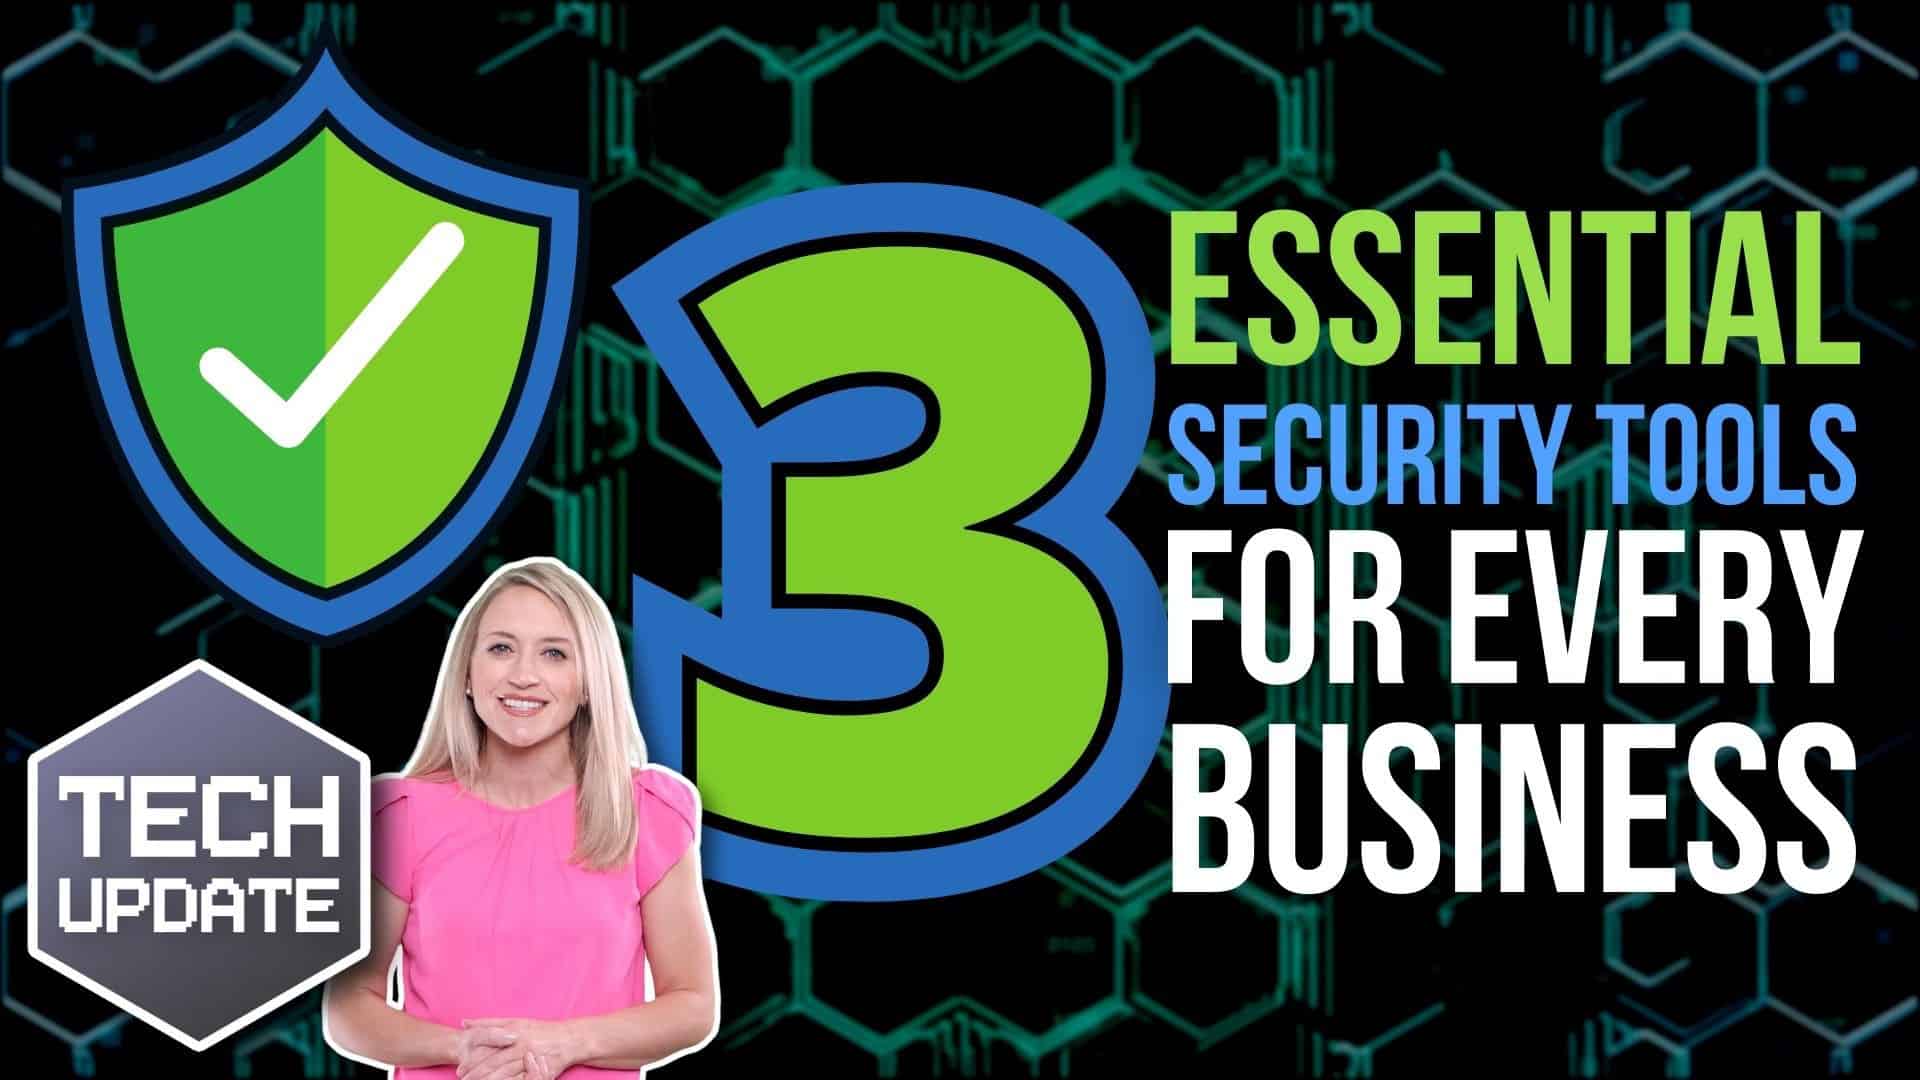 Back to Basics: Does Your Business Have These Three Must-Have Security Tools? cover